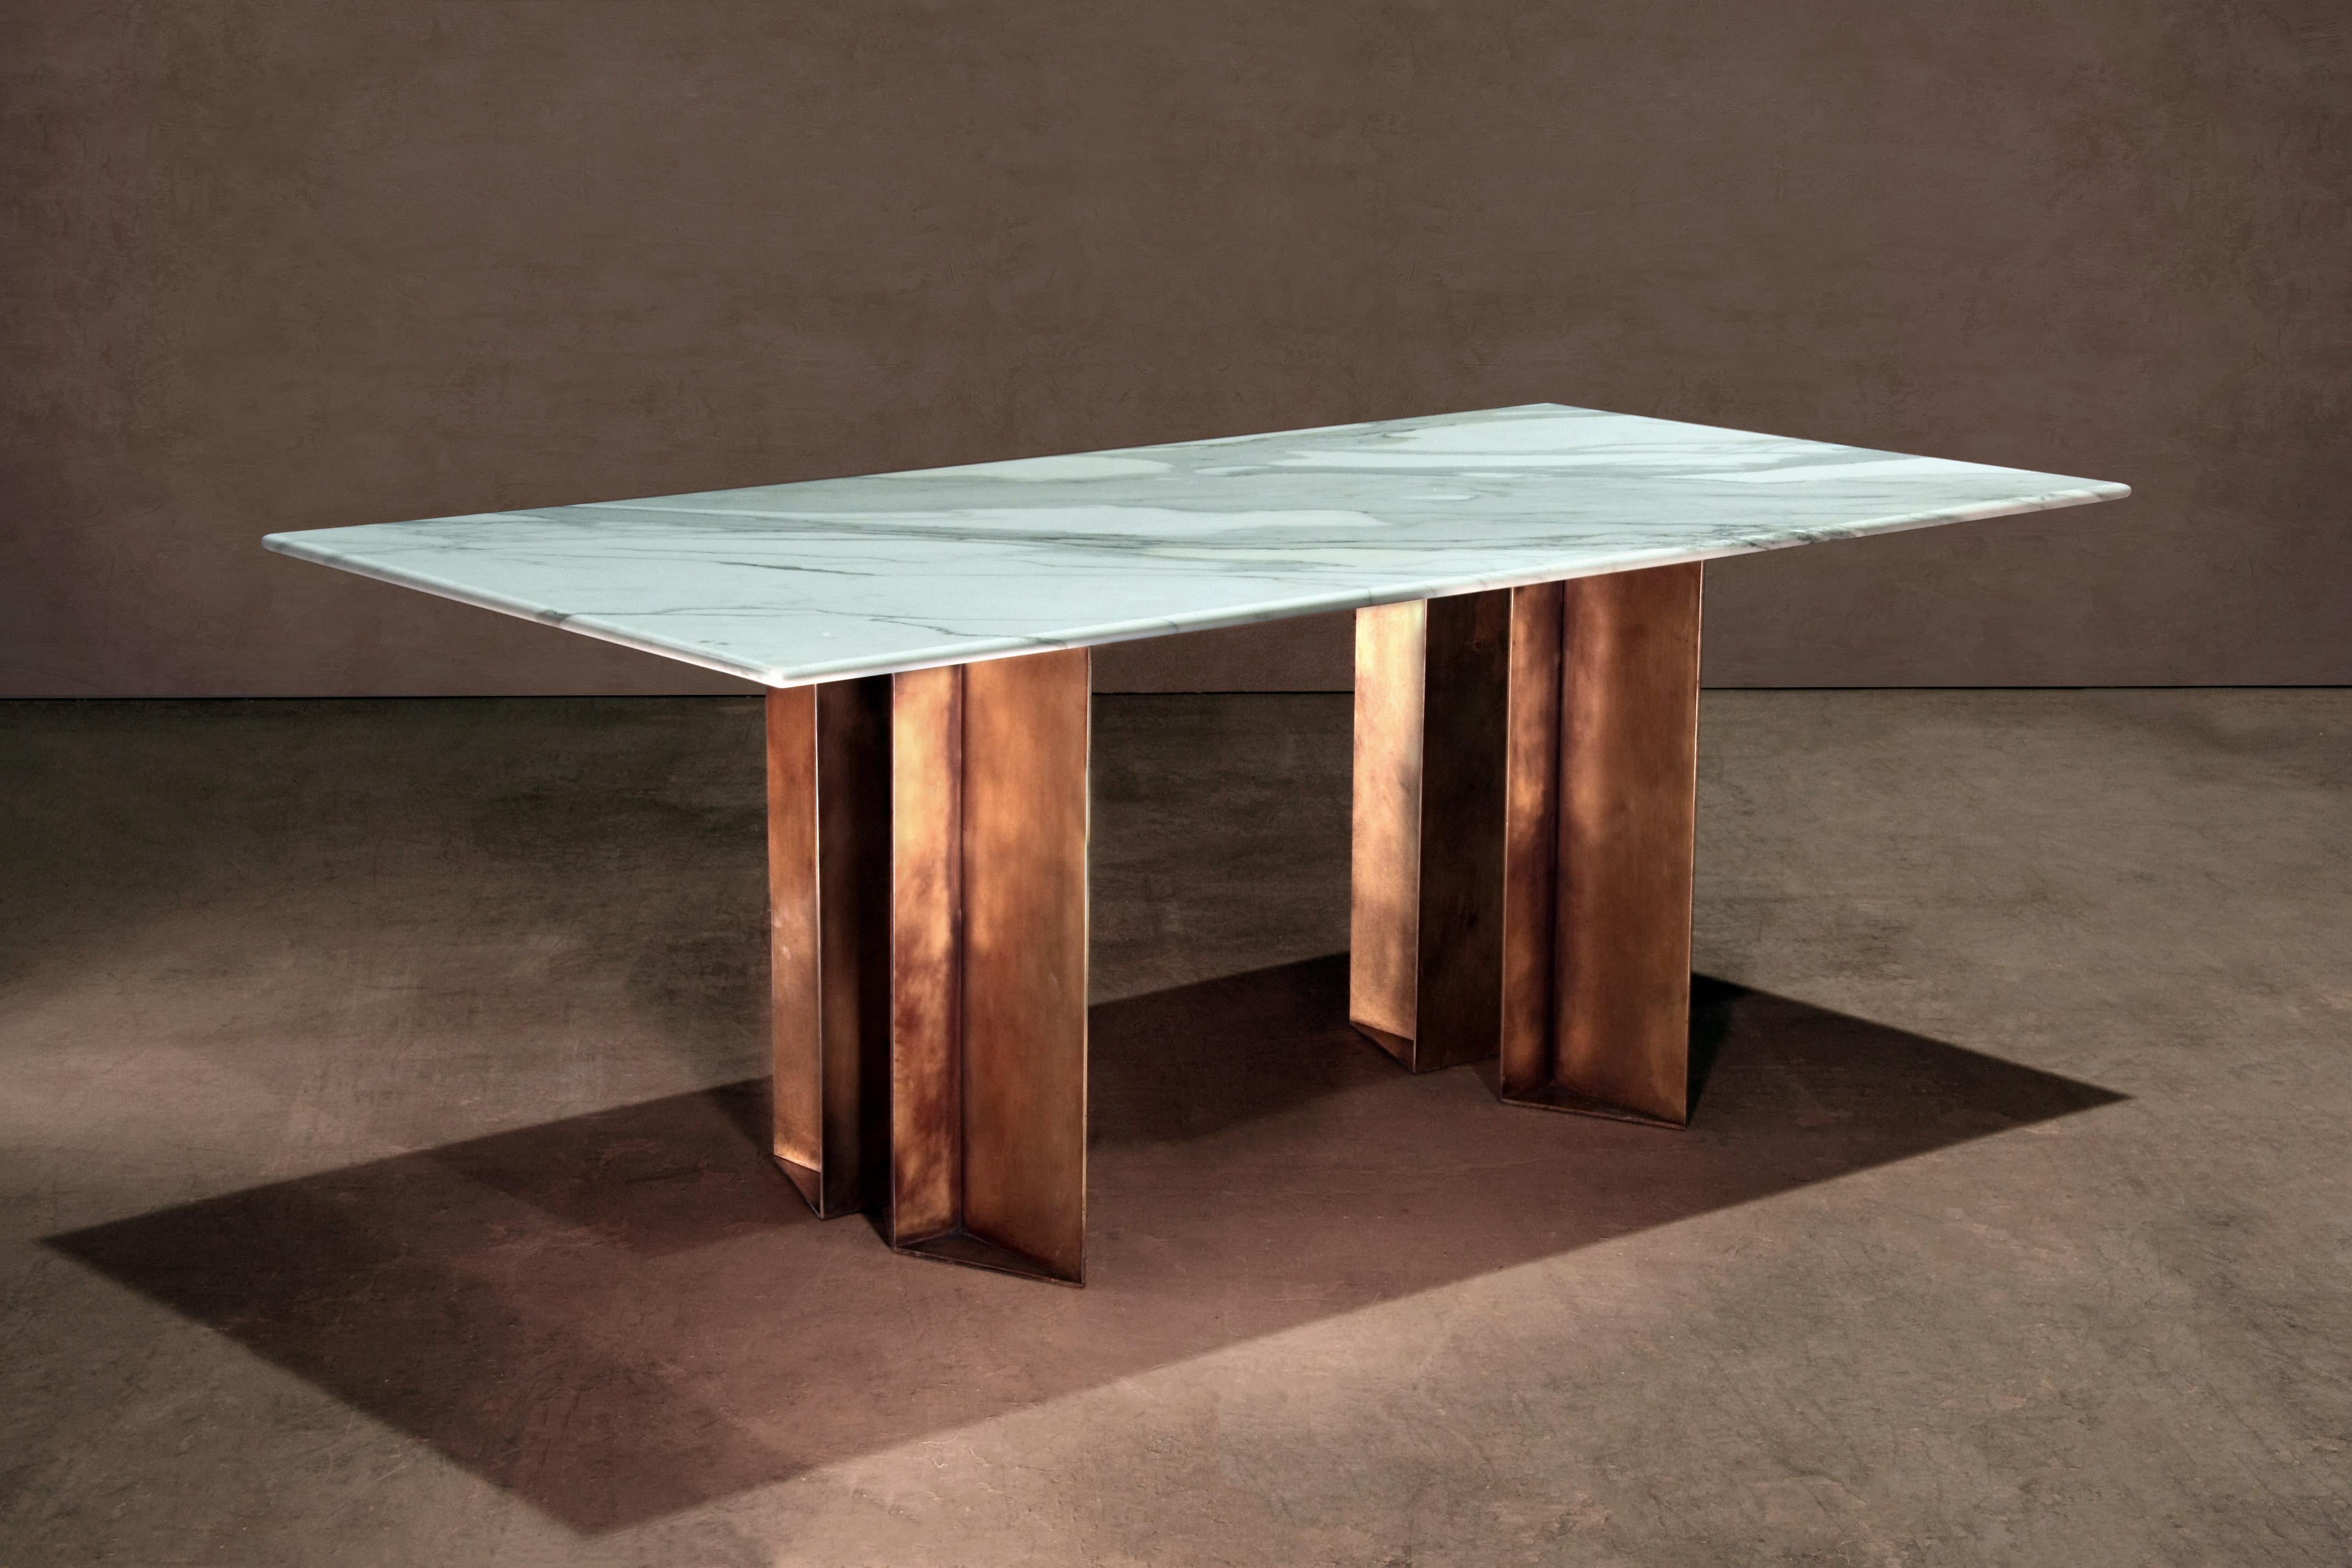 Marble and brass dining table handcrafted and signed by Novocastrian

Dining table in Calacatta Bourghini and patinated brass. A collaboration between novocastrian and architecture and interior design studio Lind and Almond. Handcrafted in North